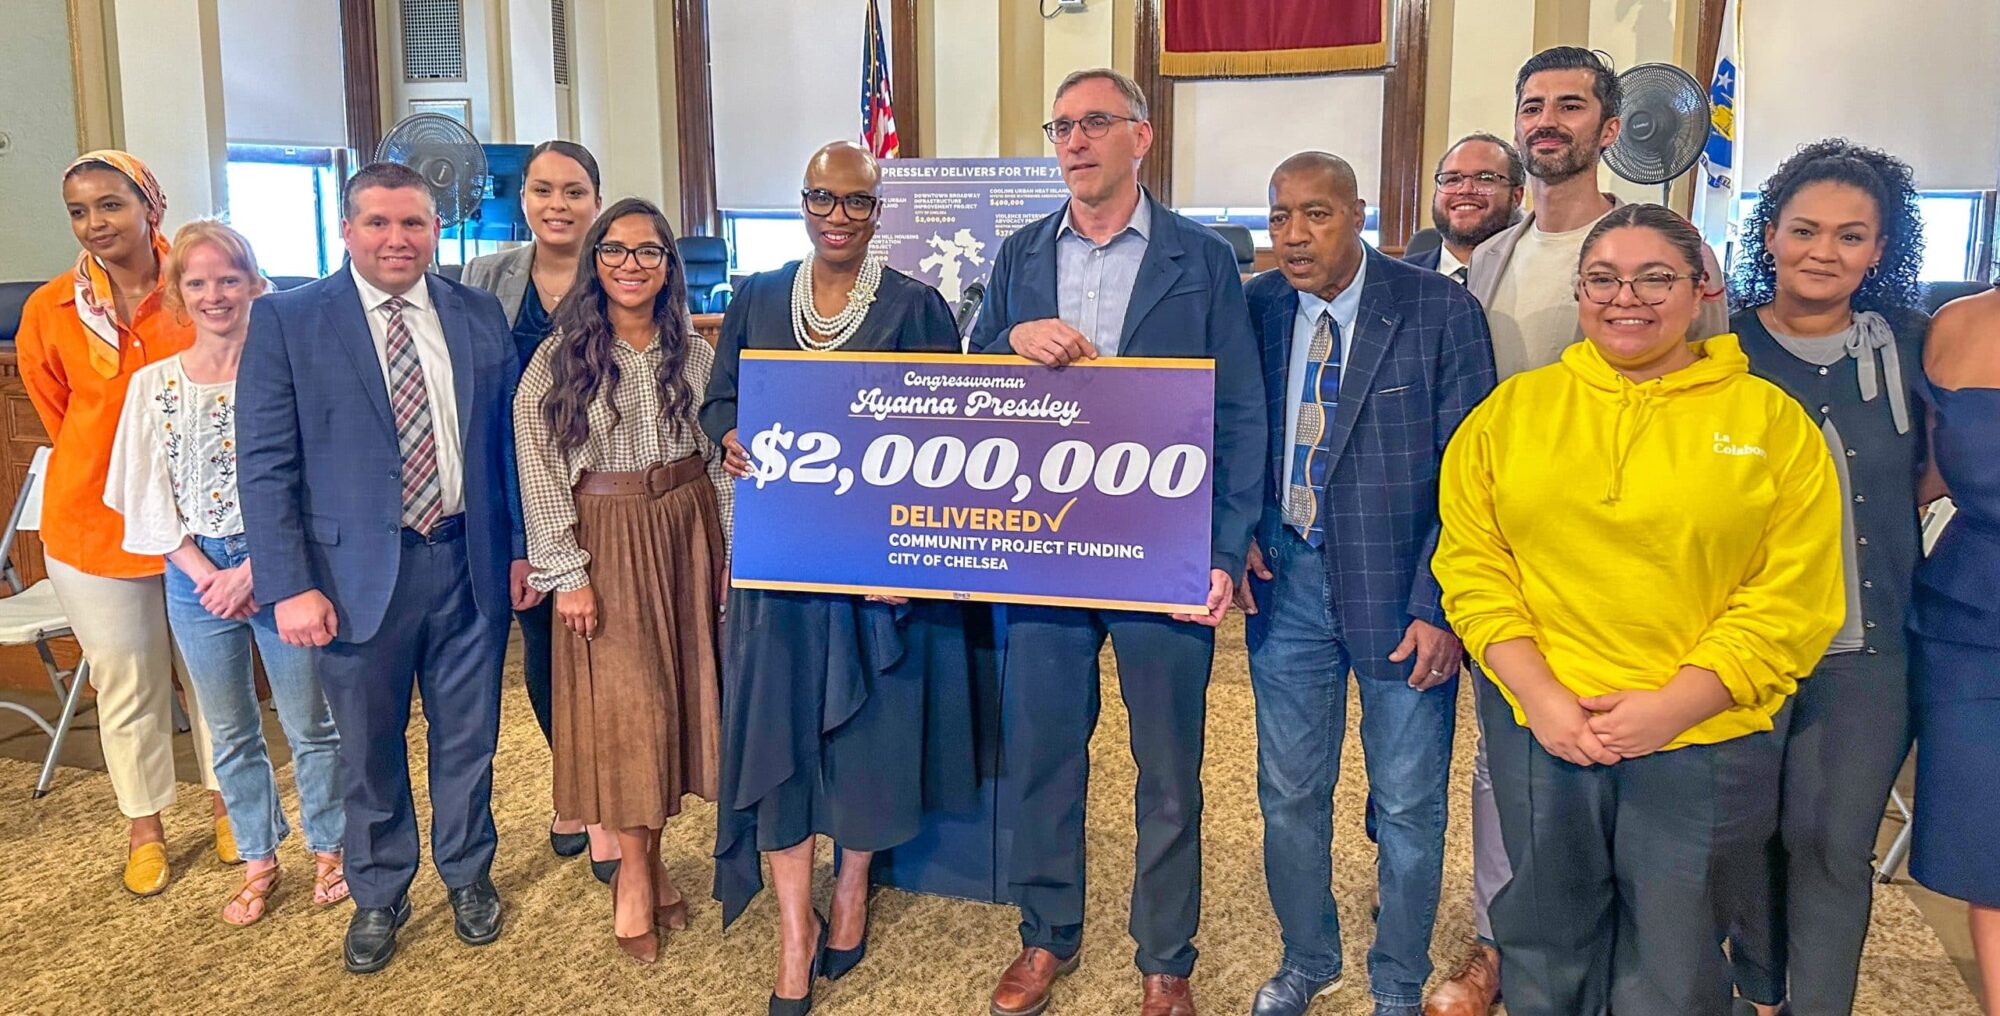 > U.S. Representative Ayanna Pressley delivers the check and celebrates the funding amount that has not been seen in Chelsea since the 1970's